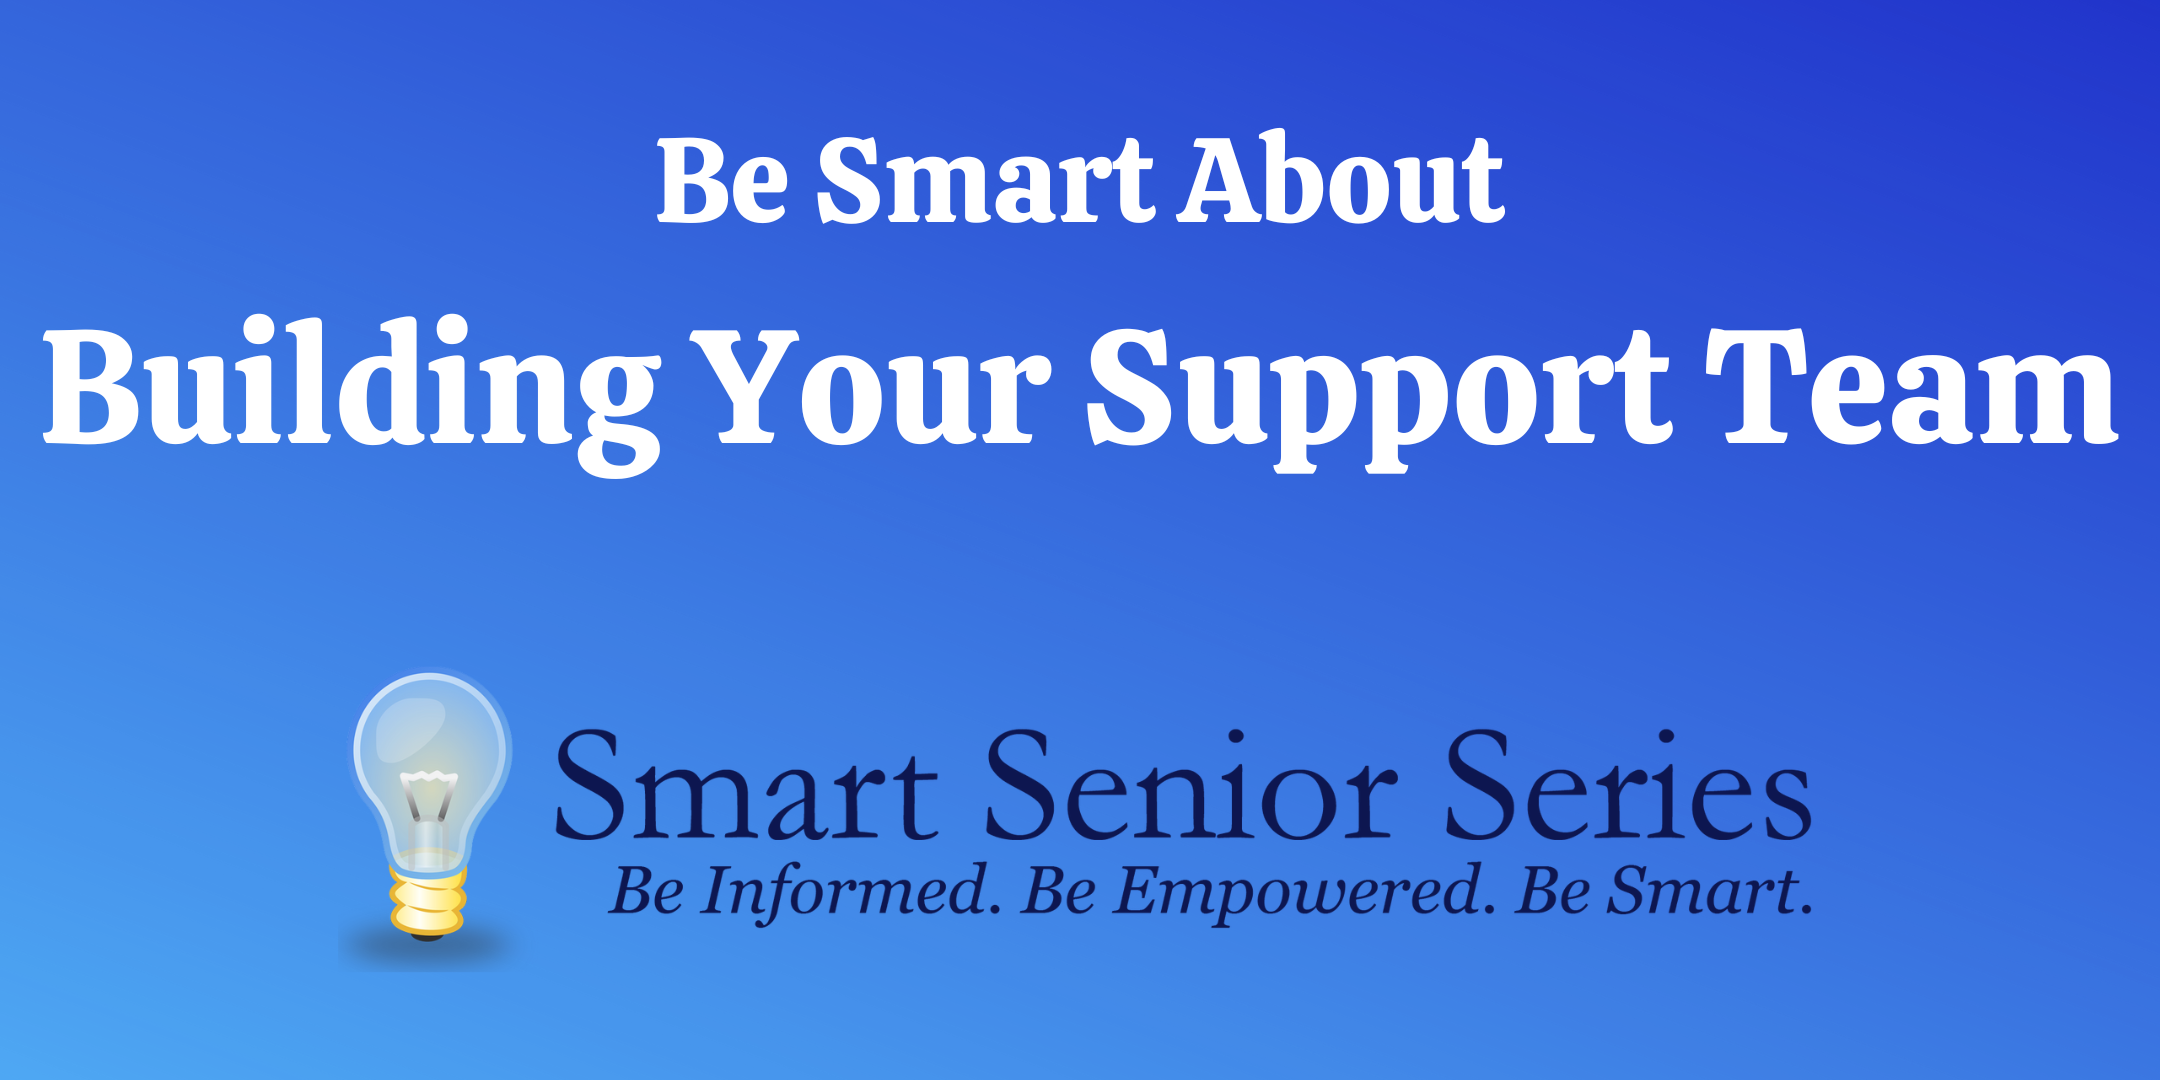 Smart Senior Series Building Your Support Team